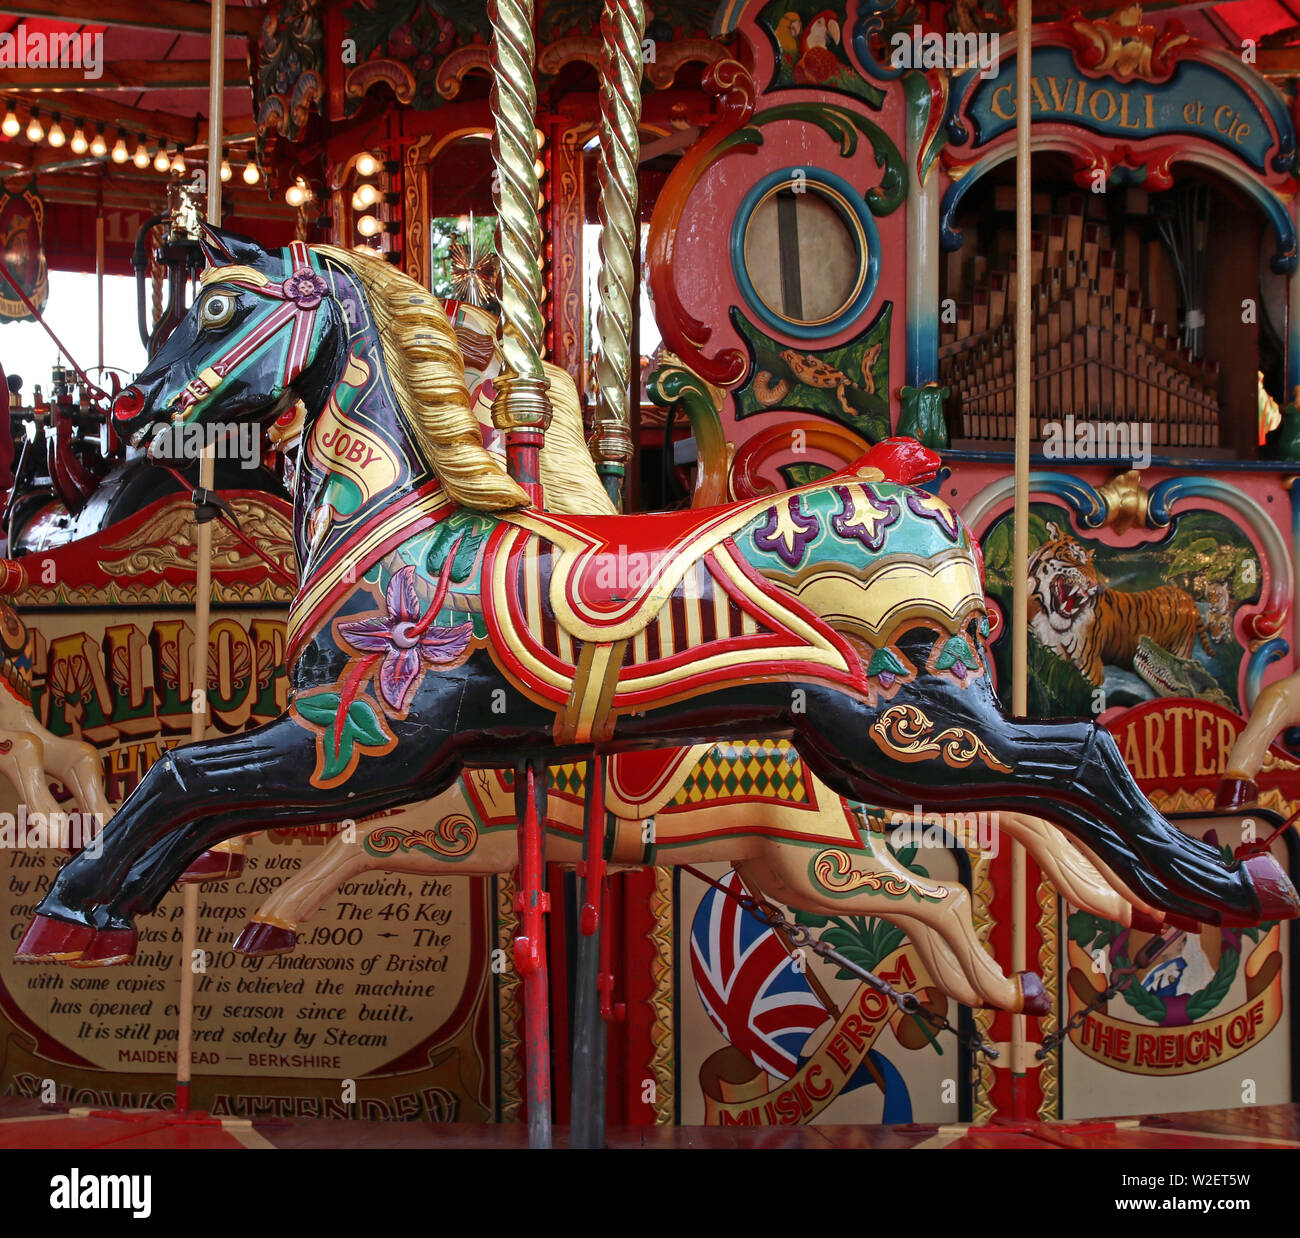 Black and gold highly decorated traditional fairground galloping horses Stock Photo